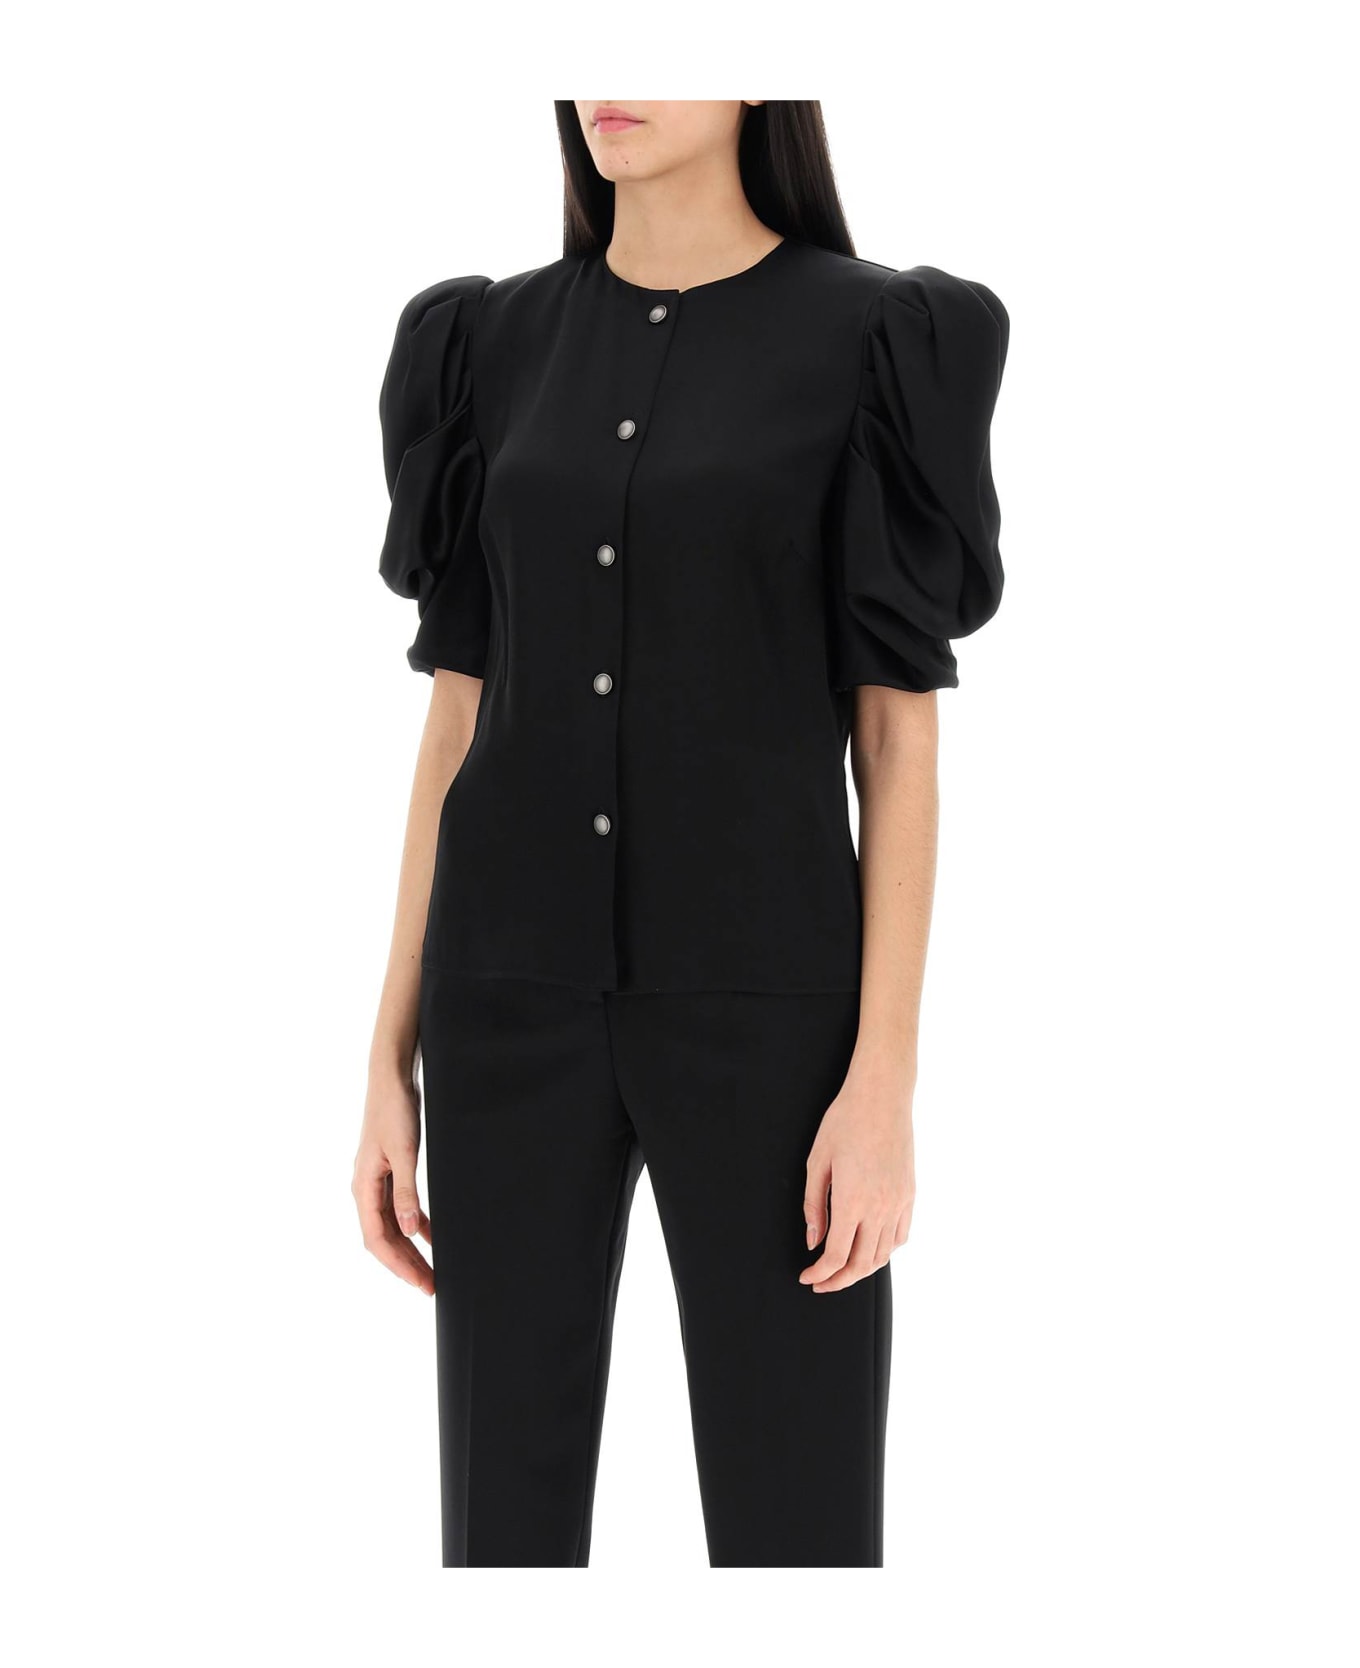 Alessandra Rich Envers Satin Blouse With Bouffant Sleeves - BLACK (Black)